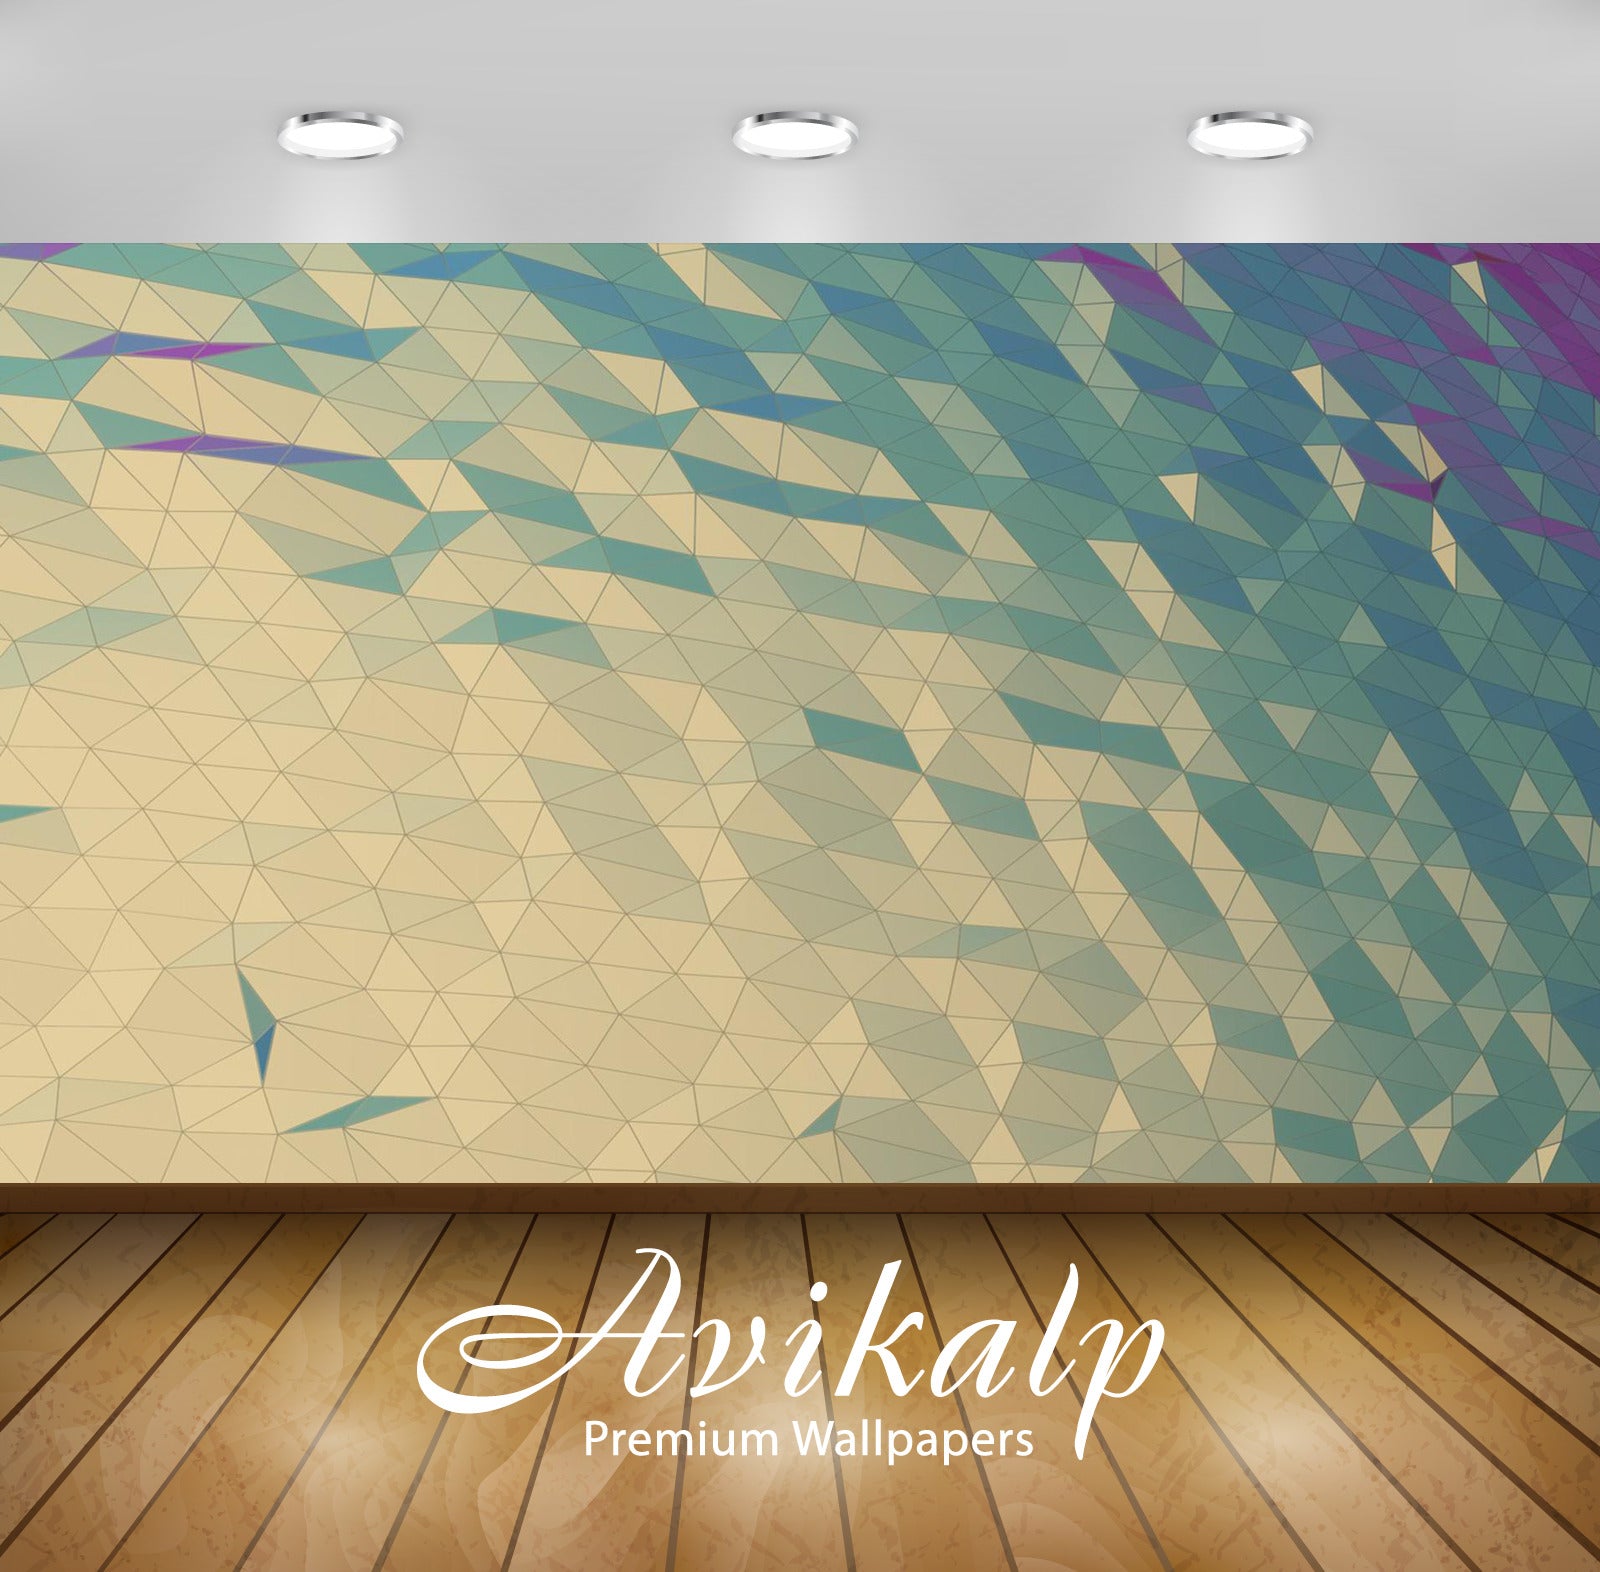 Avikalp Exclusive Awi4519 Mosaic Full HD Wallpapers for Living room, Hall, Kids Room, Kitchen, TV Ba